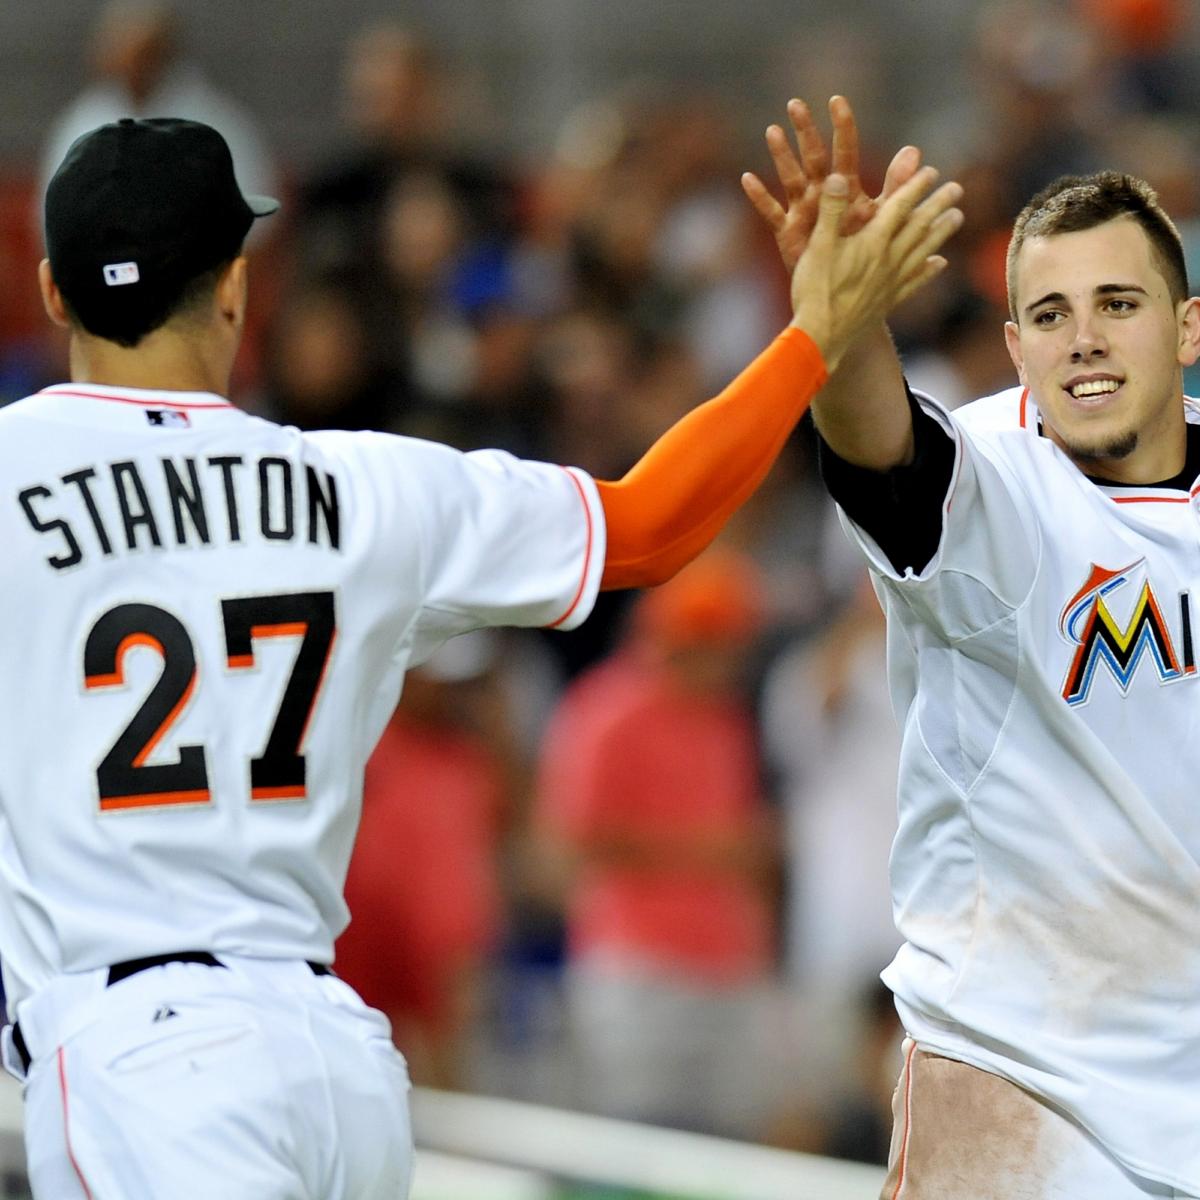 Giancarlo Stanton wasn't happy after the Marlins lost to rival